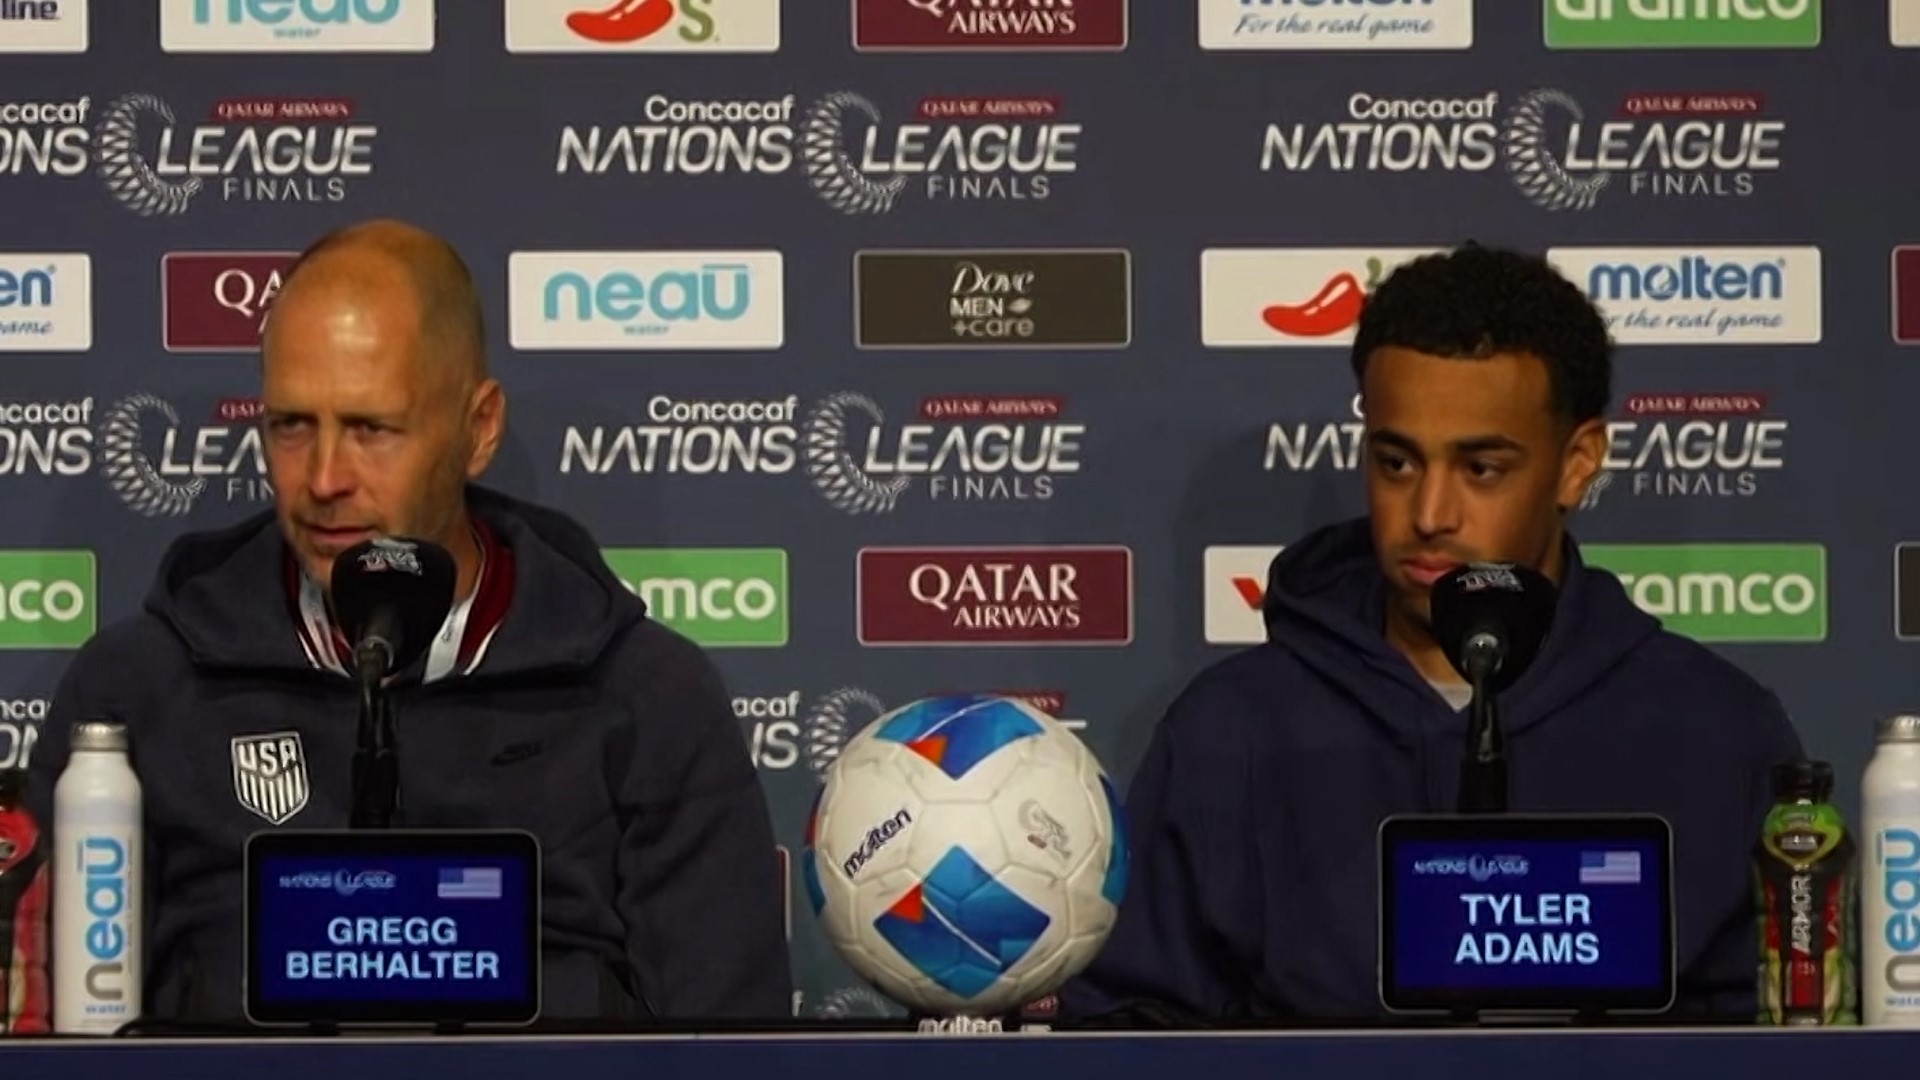 United States head coach Gregg Berhalter and midfielder Tyler Adams speak to the media before their match against Mexico in the Concacaf Nations League Final.